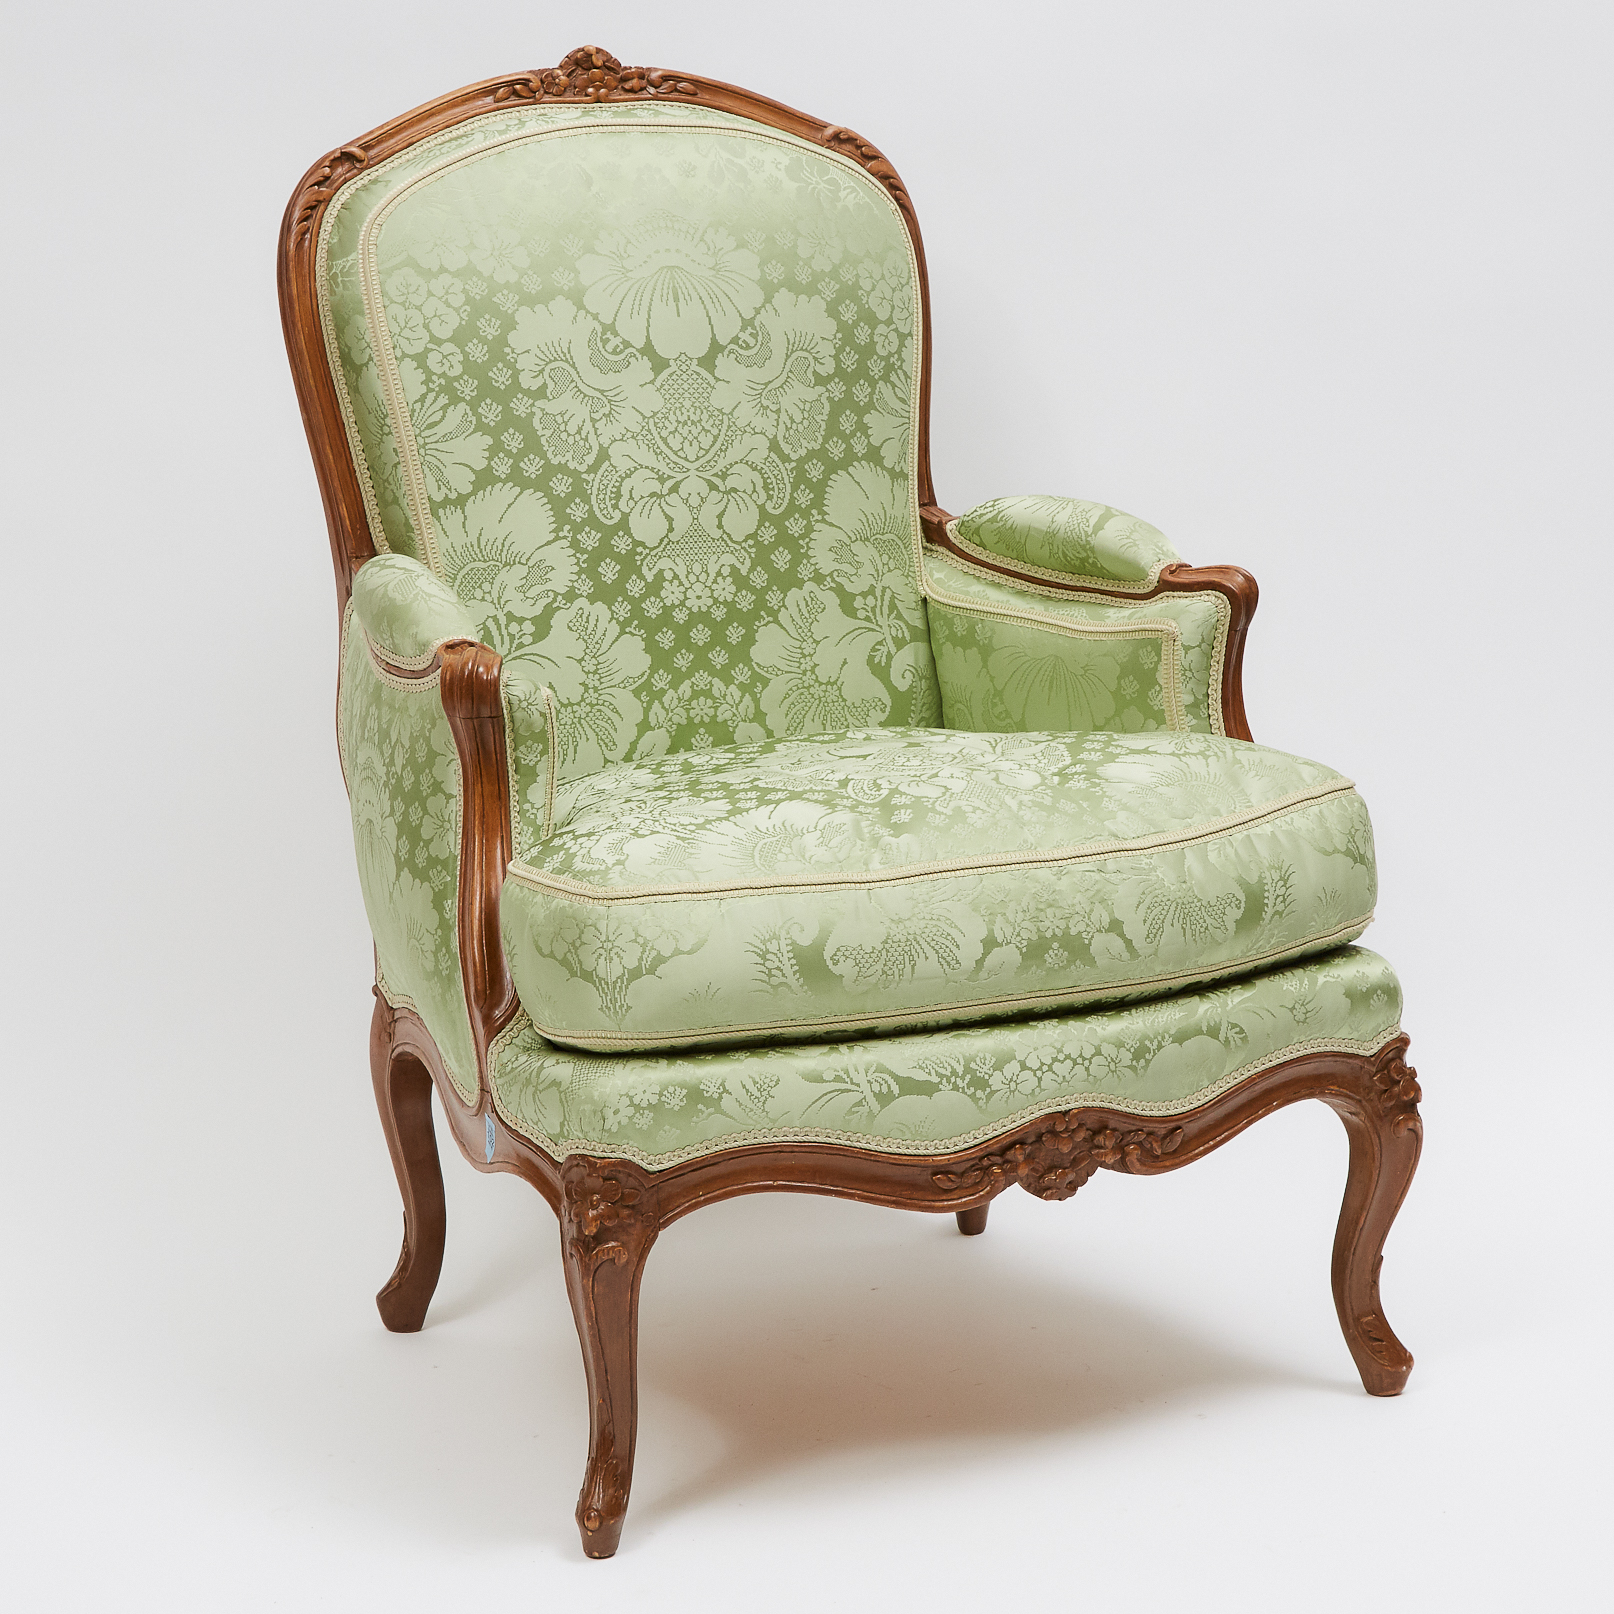 French Provincial Carved Walnut Bergere, 19th/early 20th century